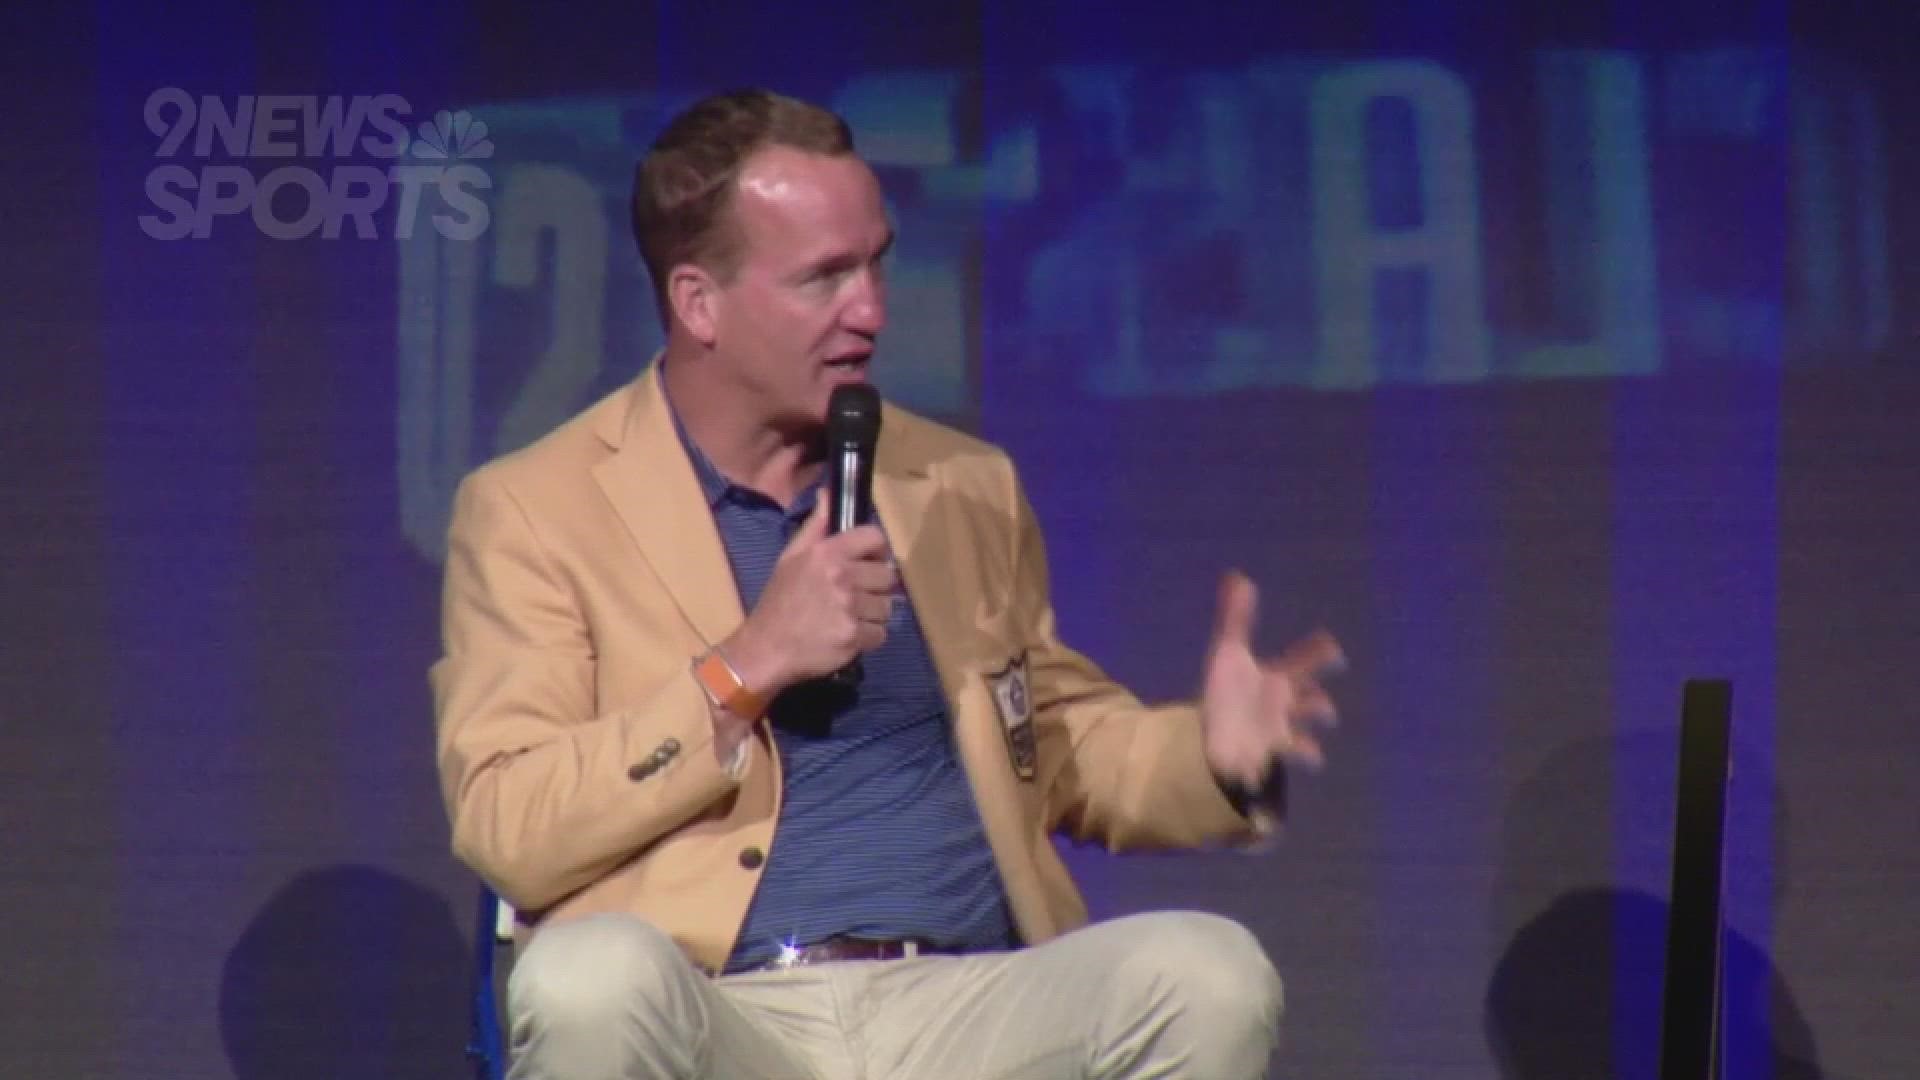 The former Broncos QB told a hilarious story at the Hall of Fame roundtable on Sunday morning.